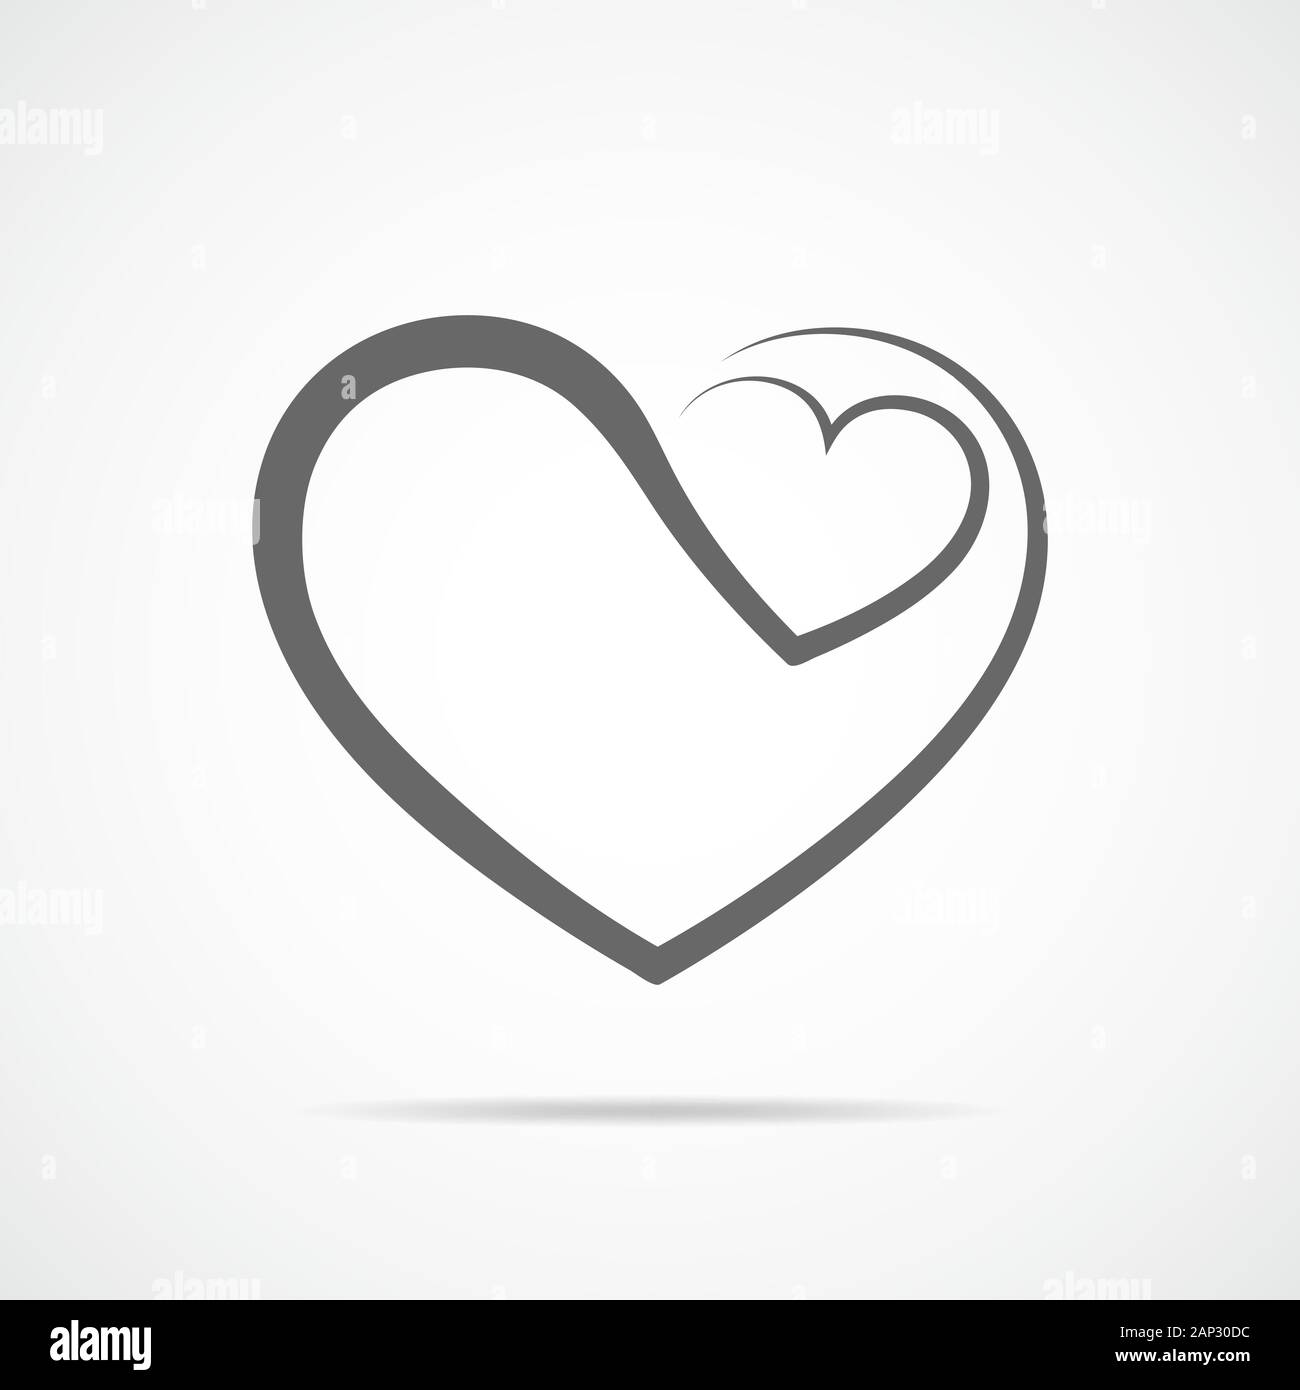 Abstract heart shape outline. Vector illustration. Gray heart icon in flat style. The heart as a symbol of love. Stock Vector